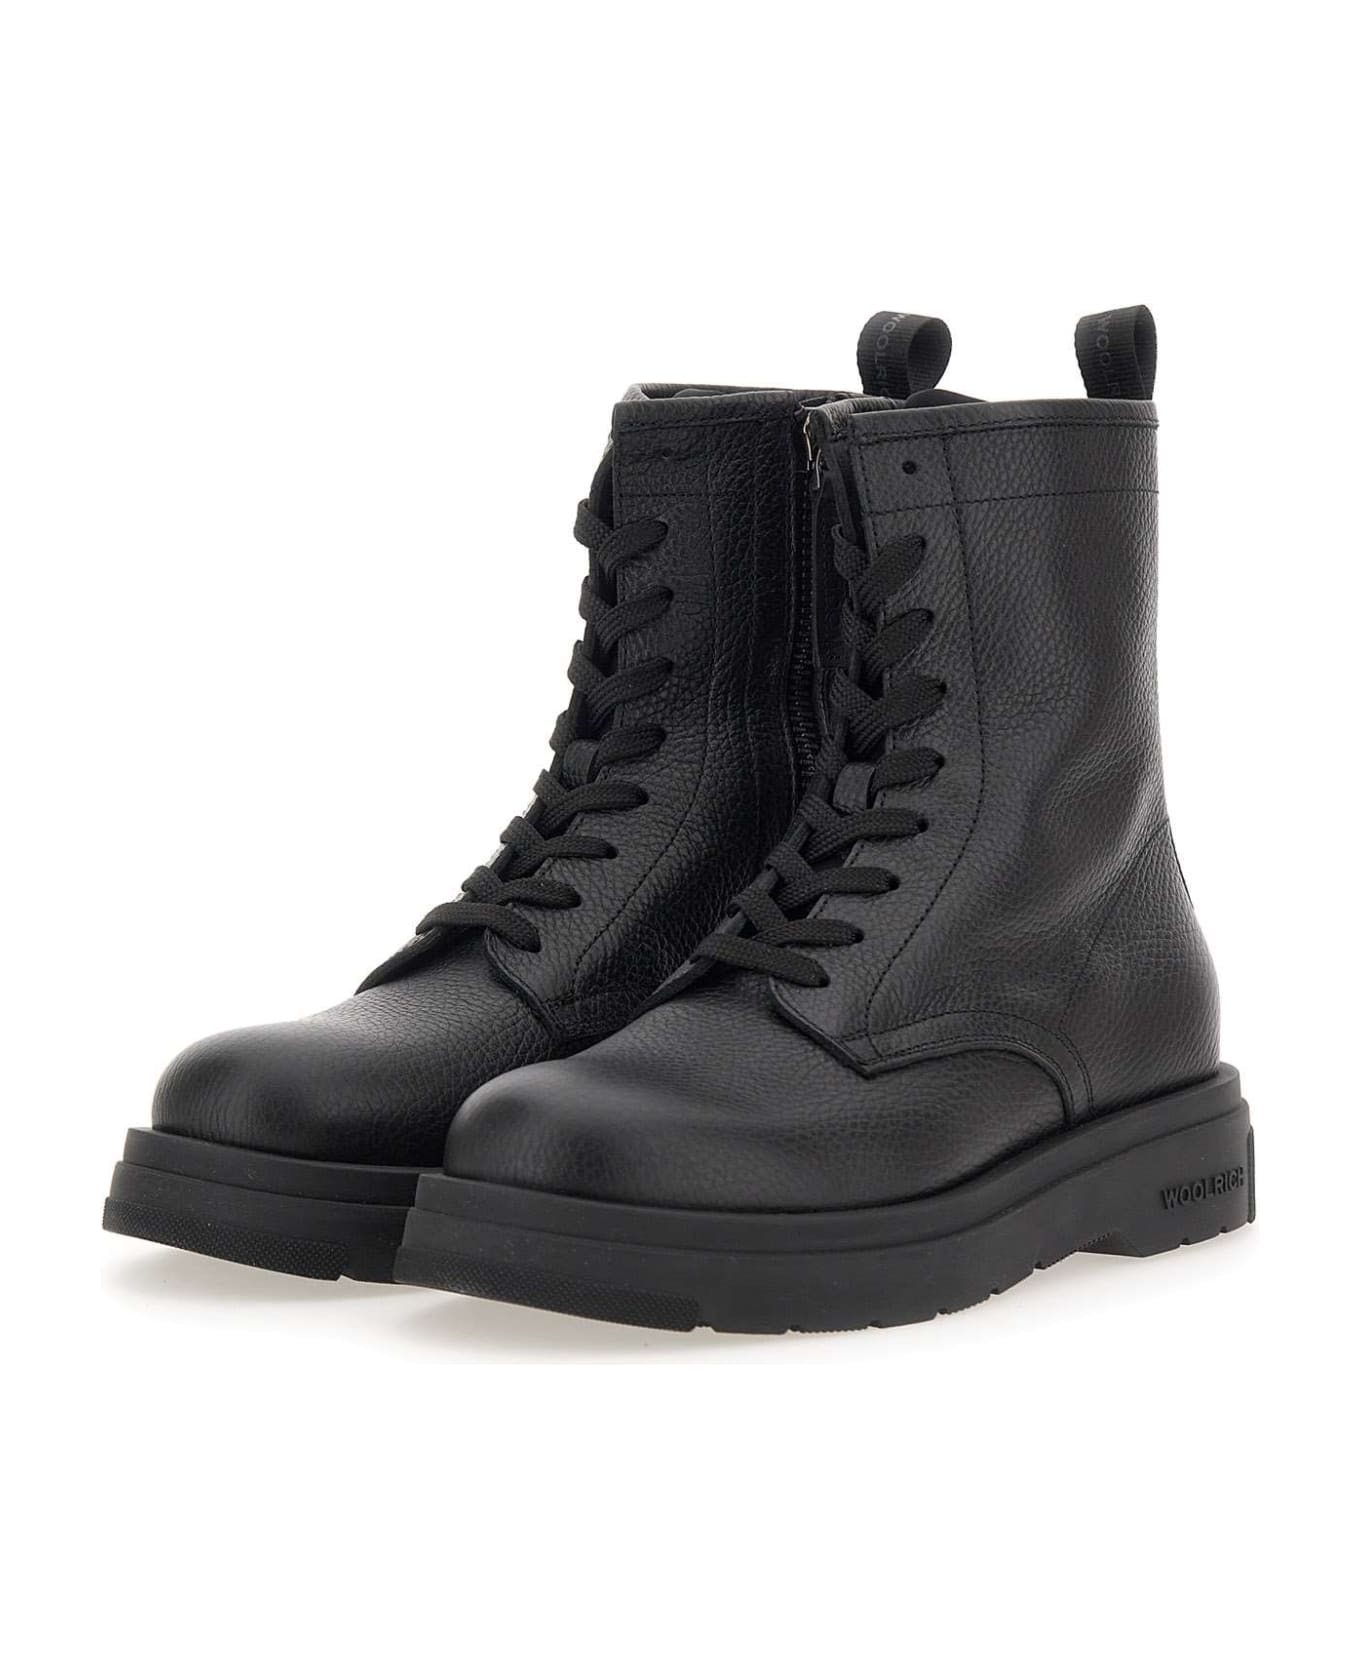 Woolrich New City' Tumbled Leather Boots - Black